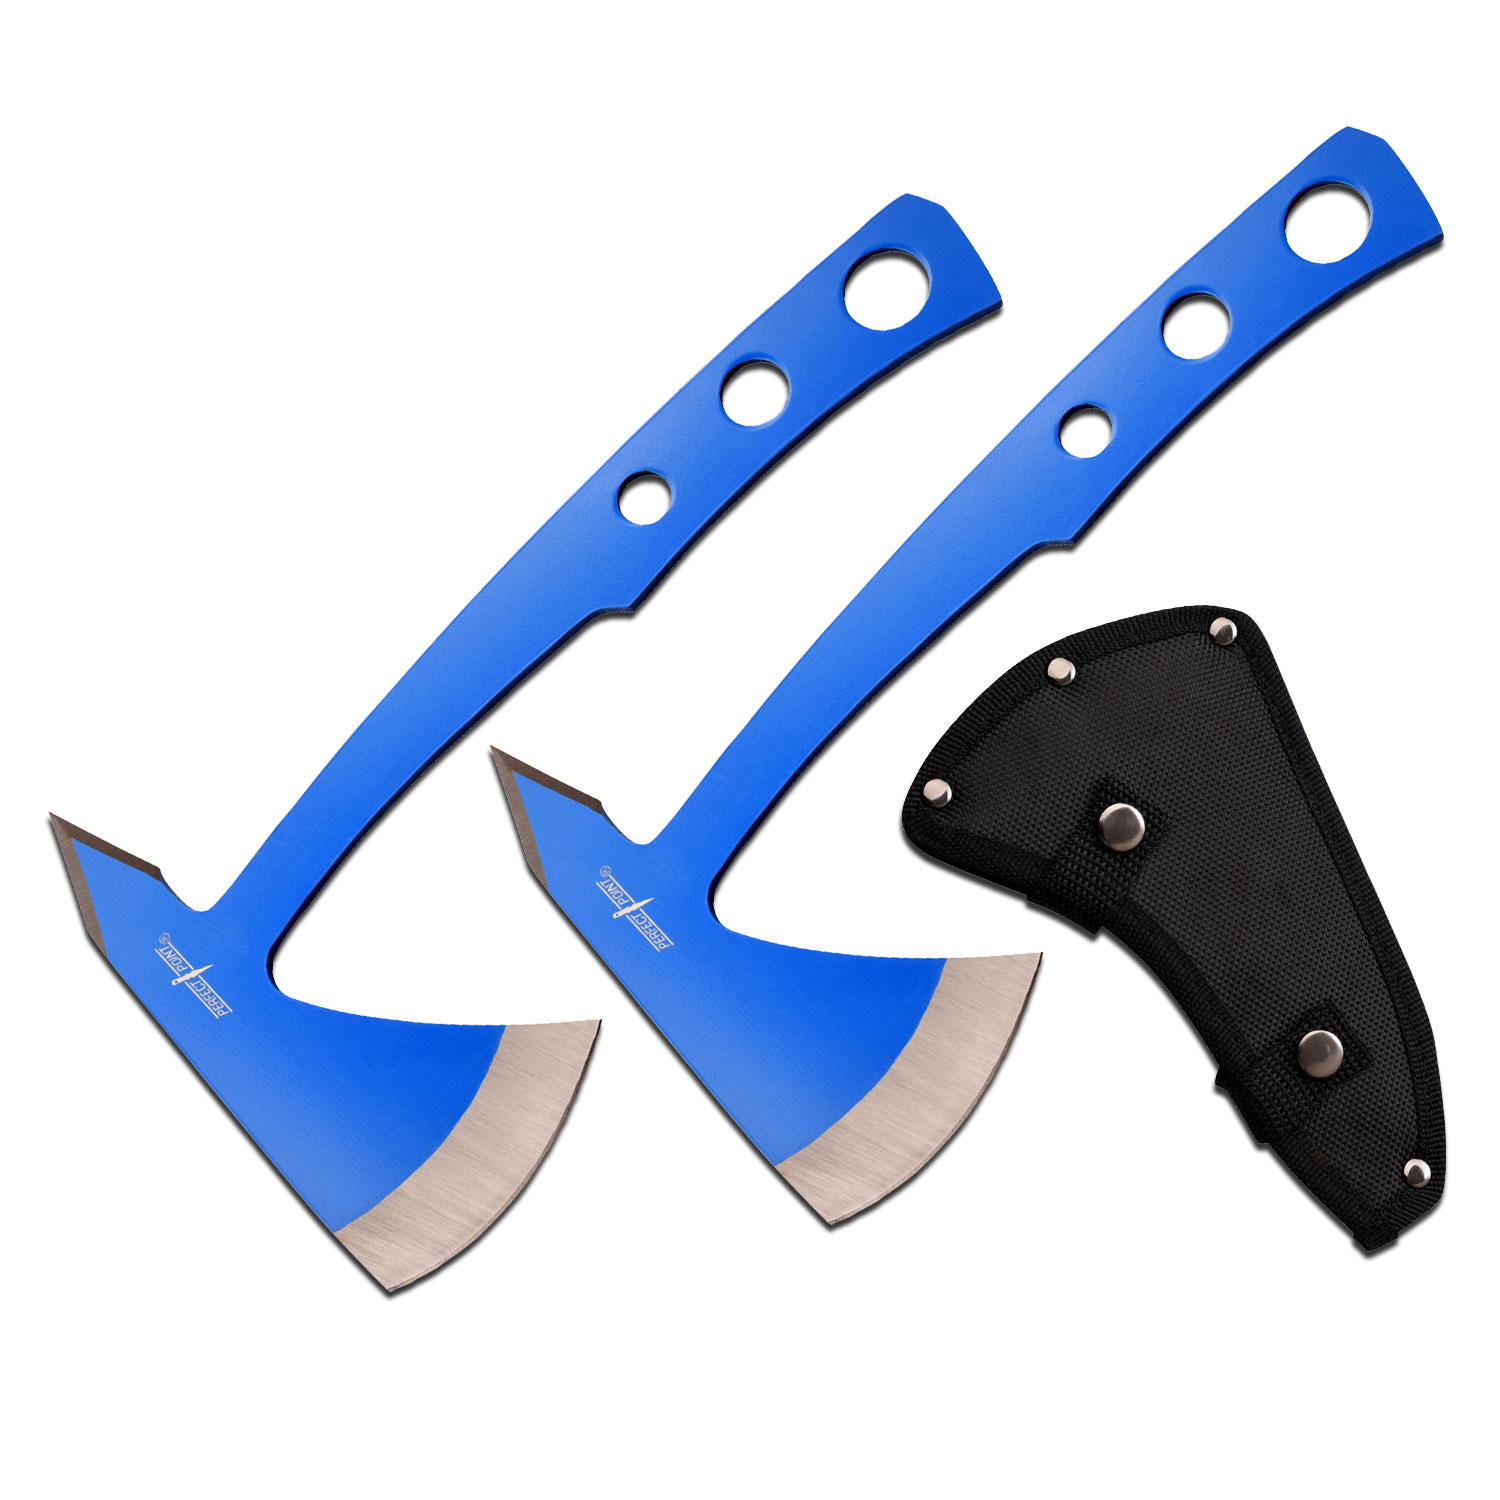 product image for Perfect-Point Blue Throwing Axe Set 2 Pc Stainless Steel Tomahawk Throwers Sheath